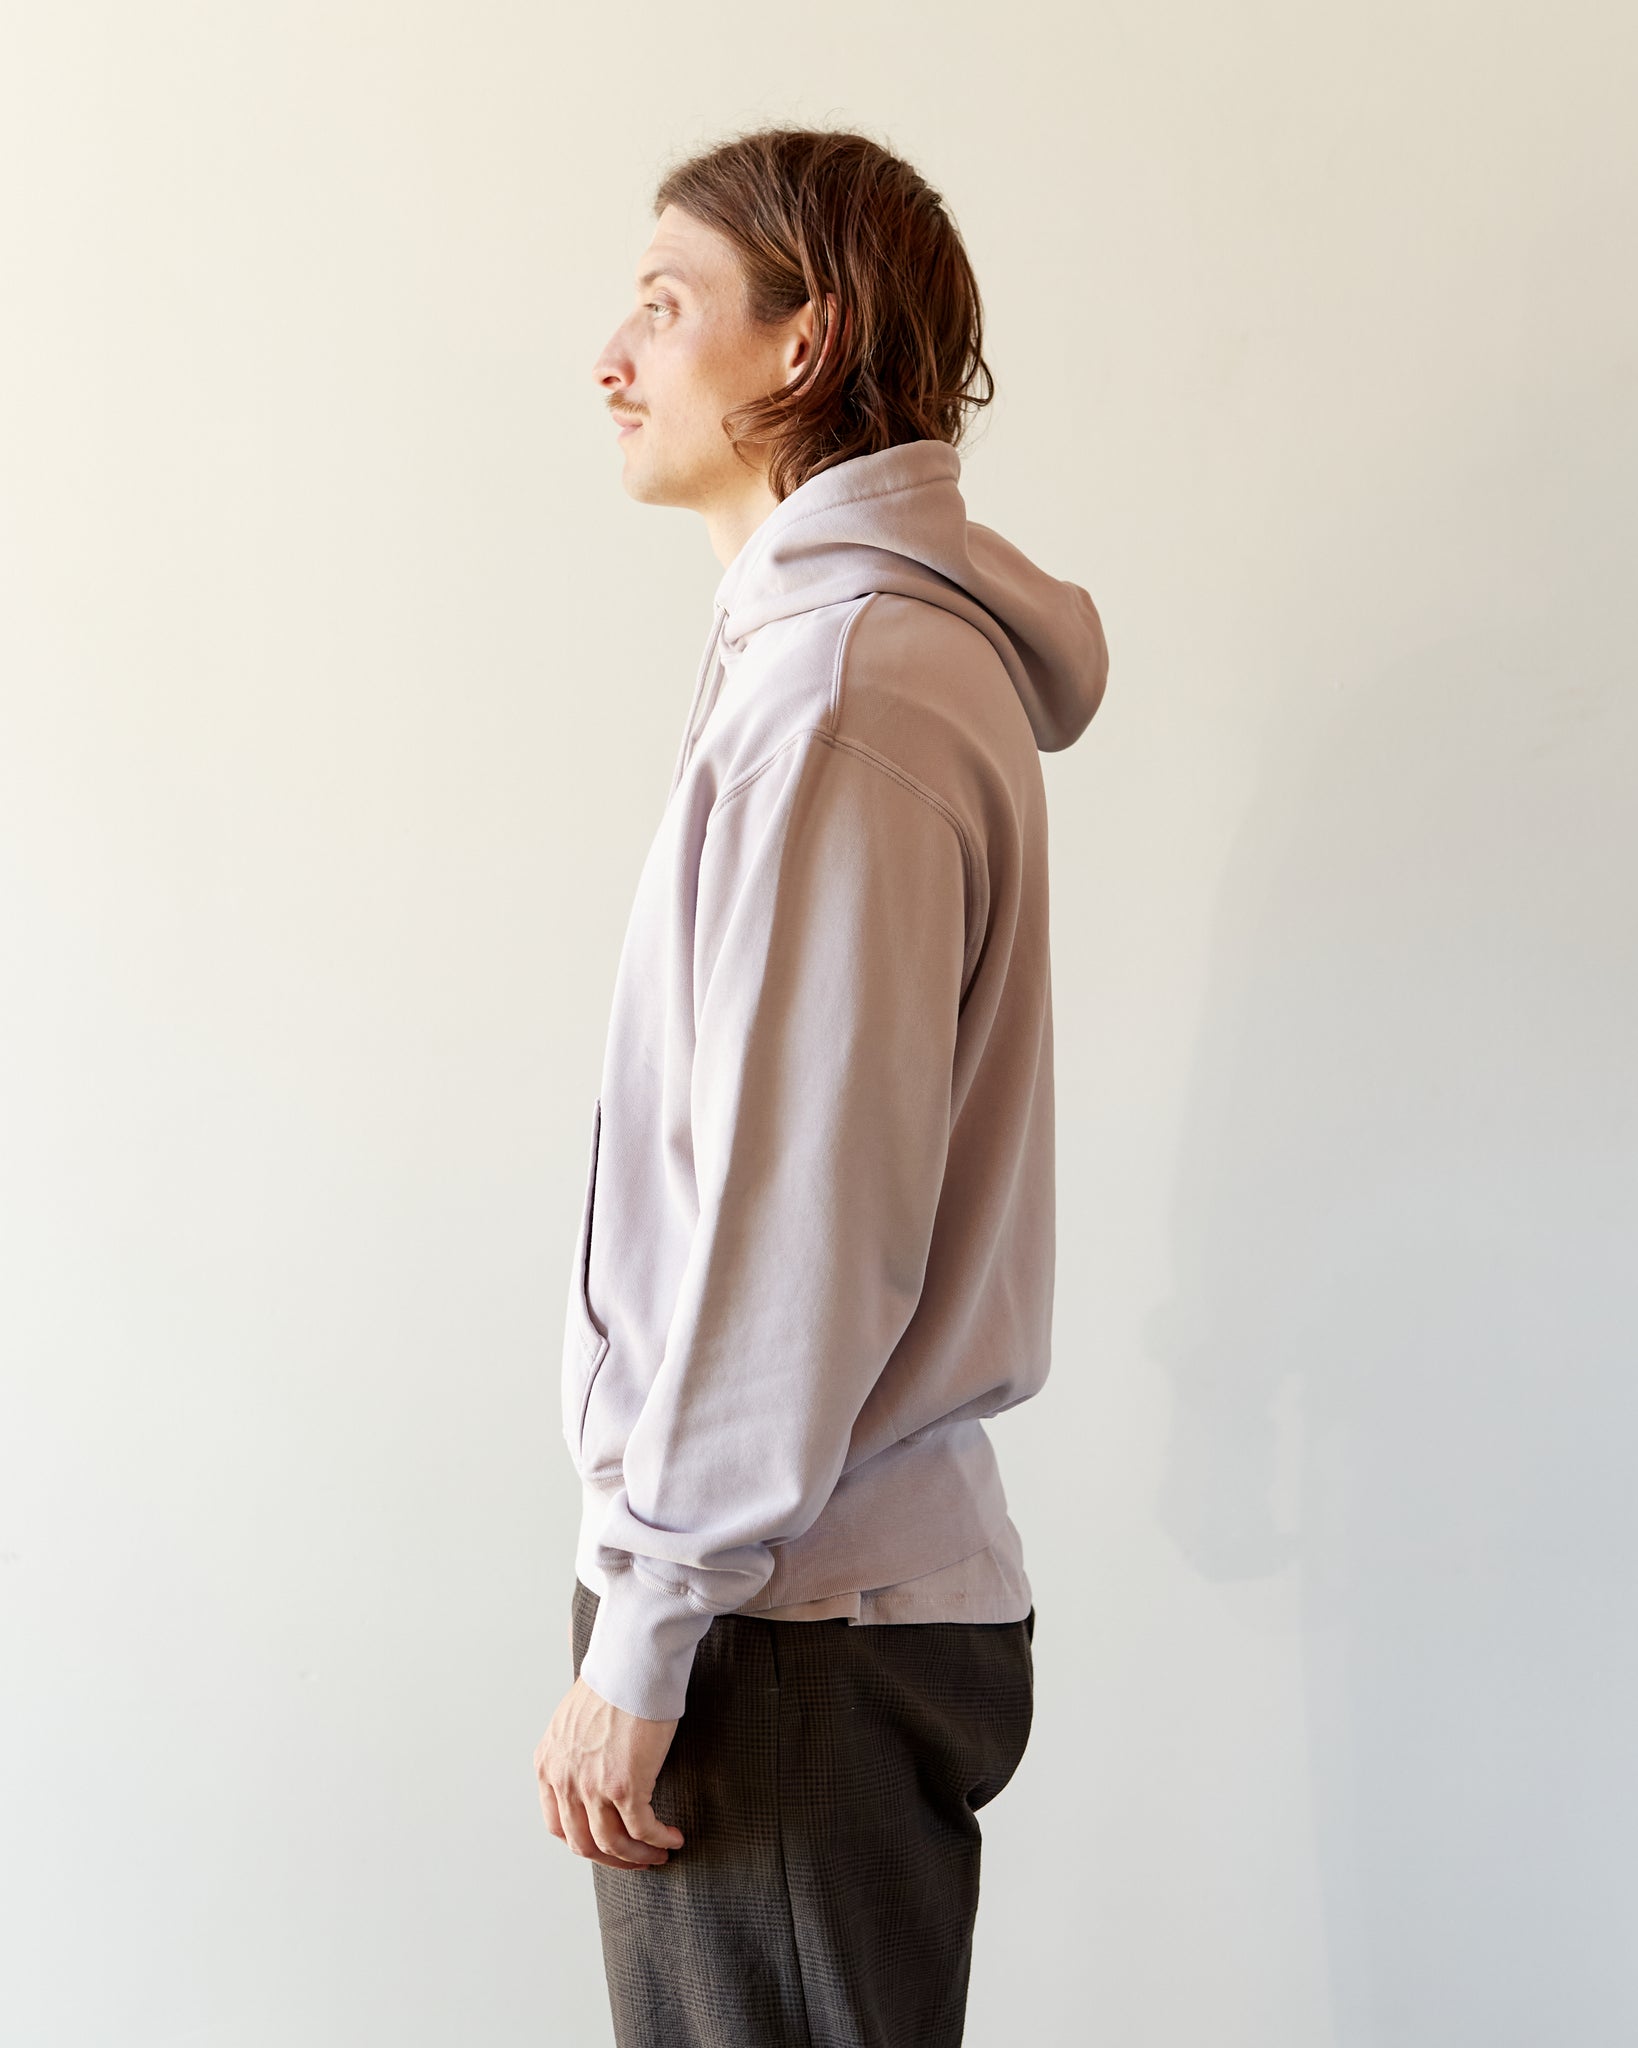 Lady White Classic Fit Hoodie, Greyish Mauve